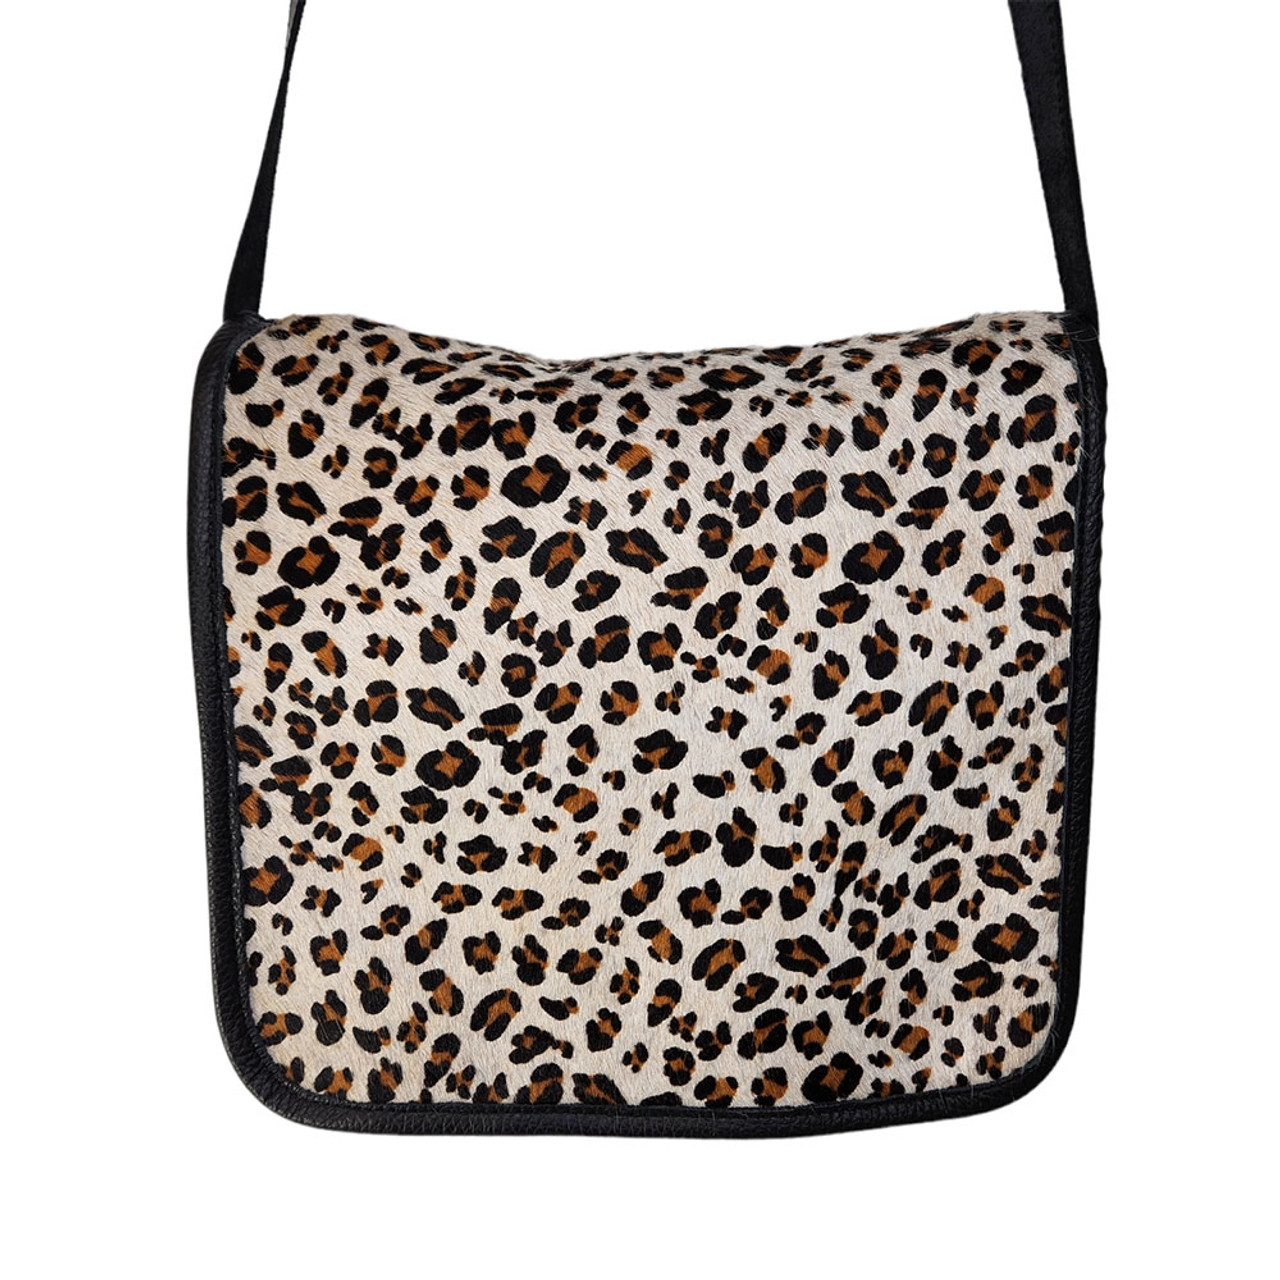 City Tote With Leopard Print And Signature Canvas Interior | COACH OUTLET |  Bags, Leopard tote, Leopard handbag